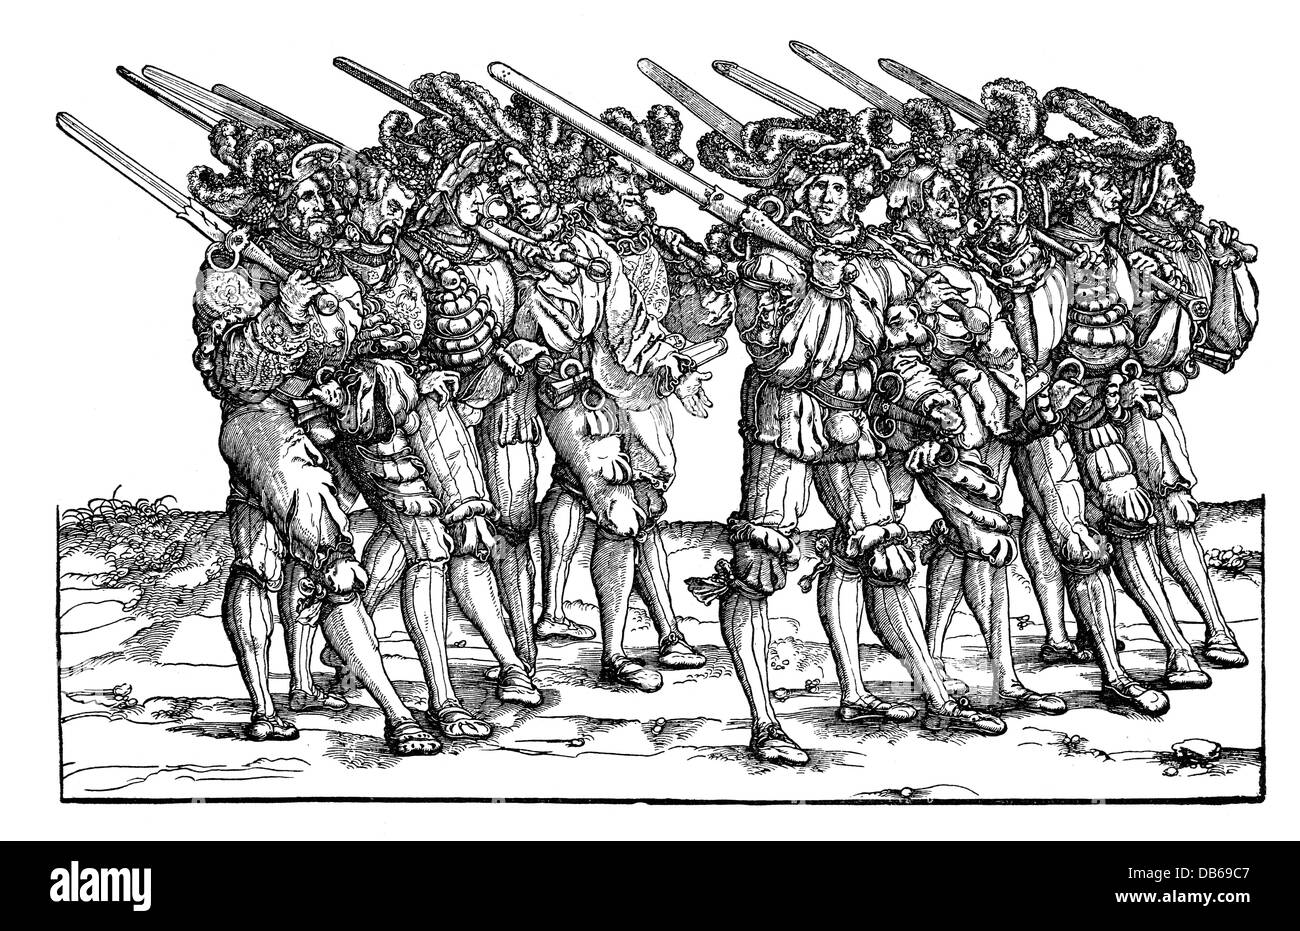 military, Landsknechts with two-handed swords and daggers, woodcut by Hans Burgkmair (1473 - 1531), illustration for the 'Triumph of Maximilian', 1516 - 1519, Additional-Rights-Clearences-Not Available Stock Photo